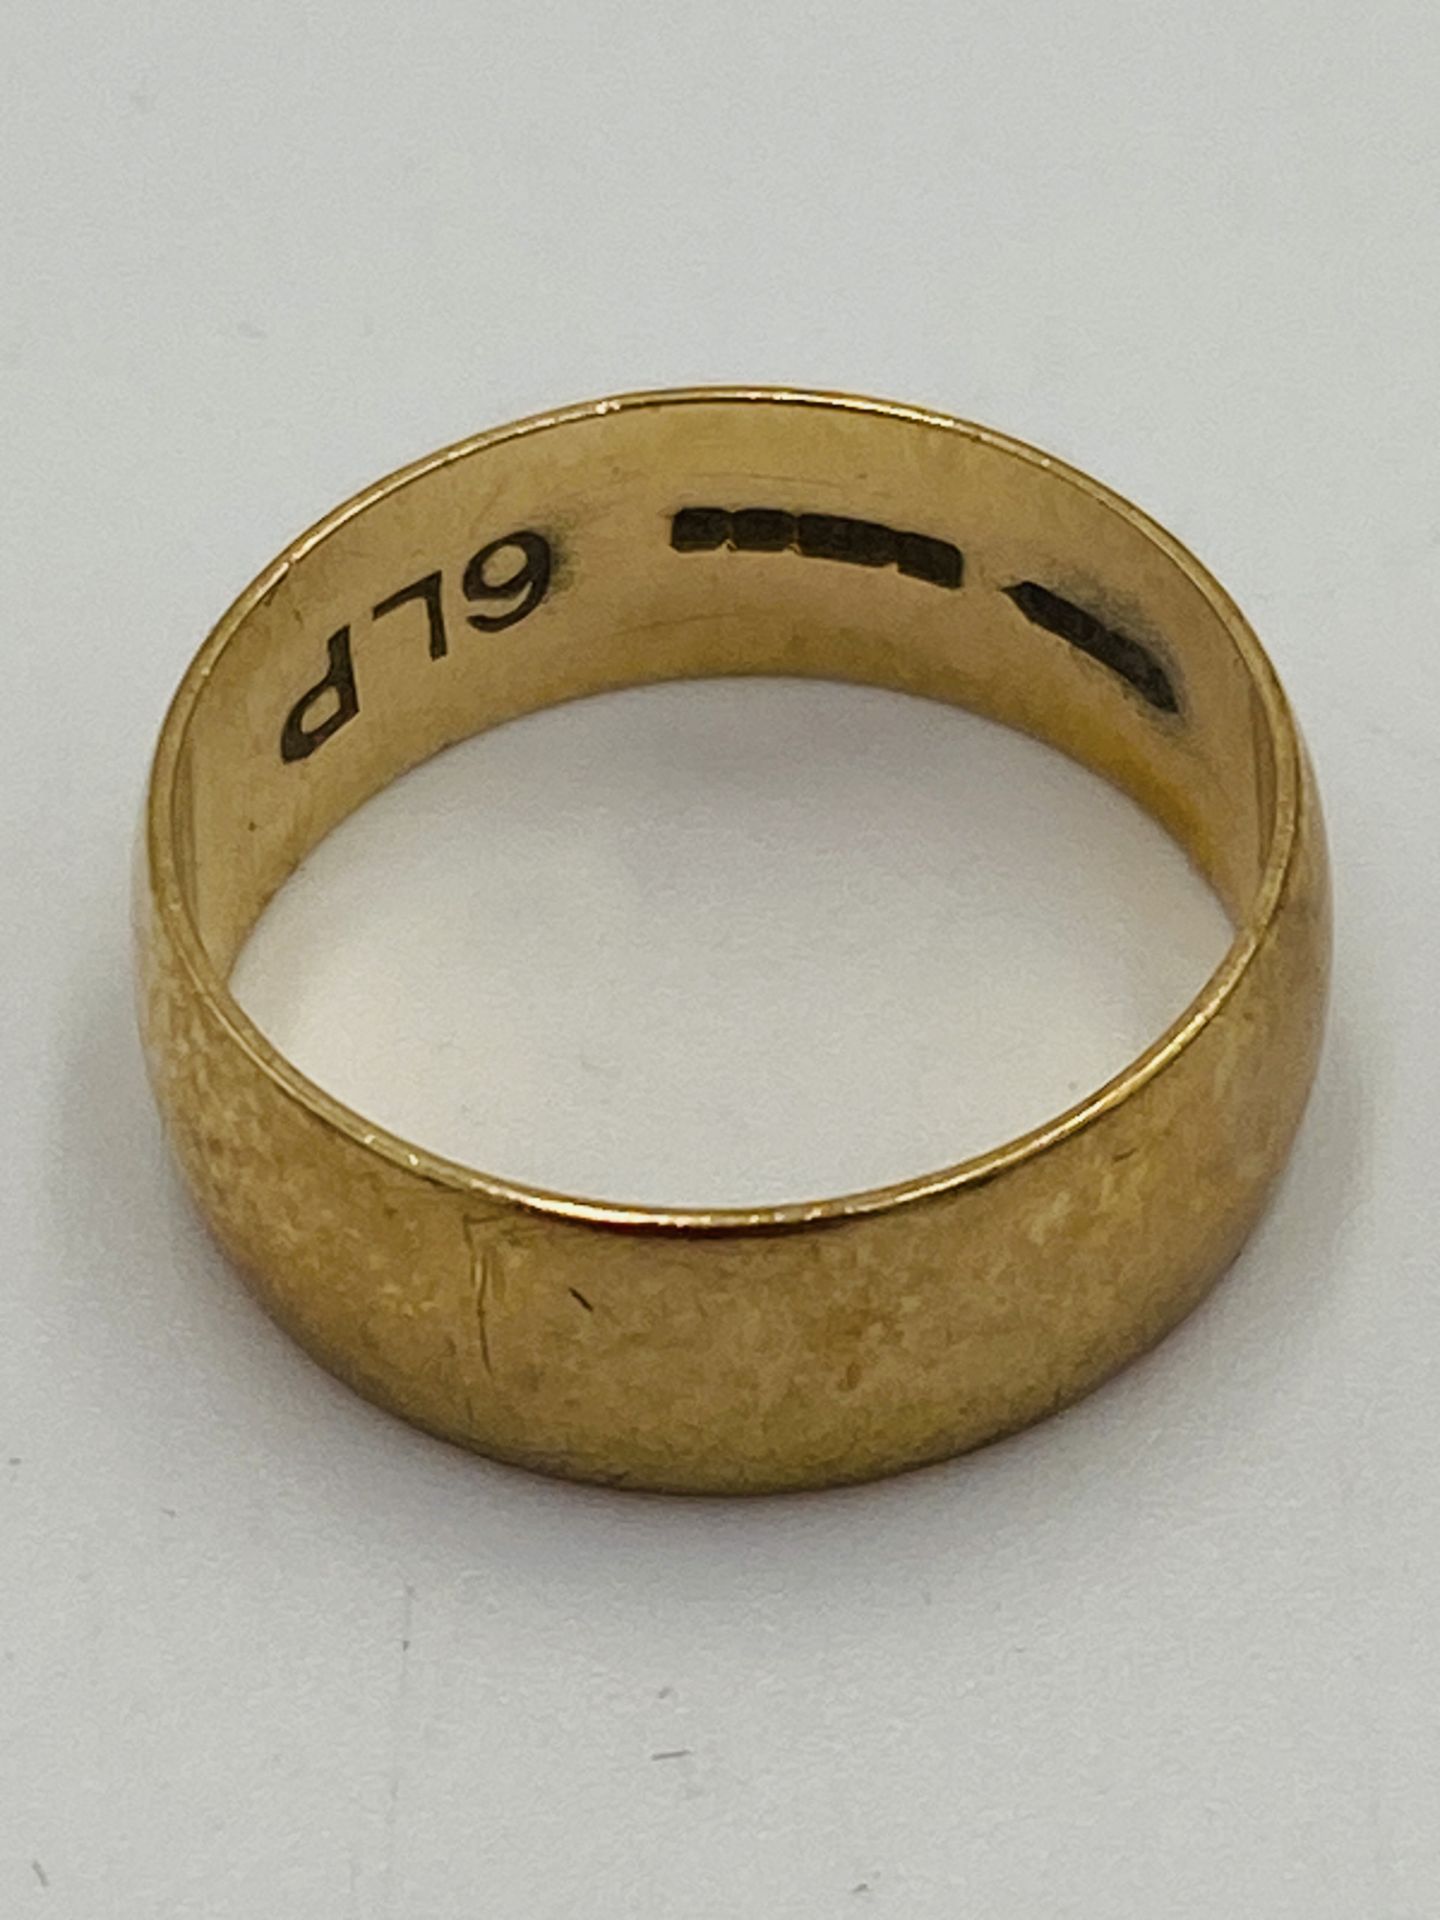 9ct gold band - Image 2 of 5